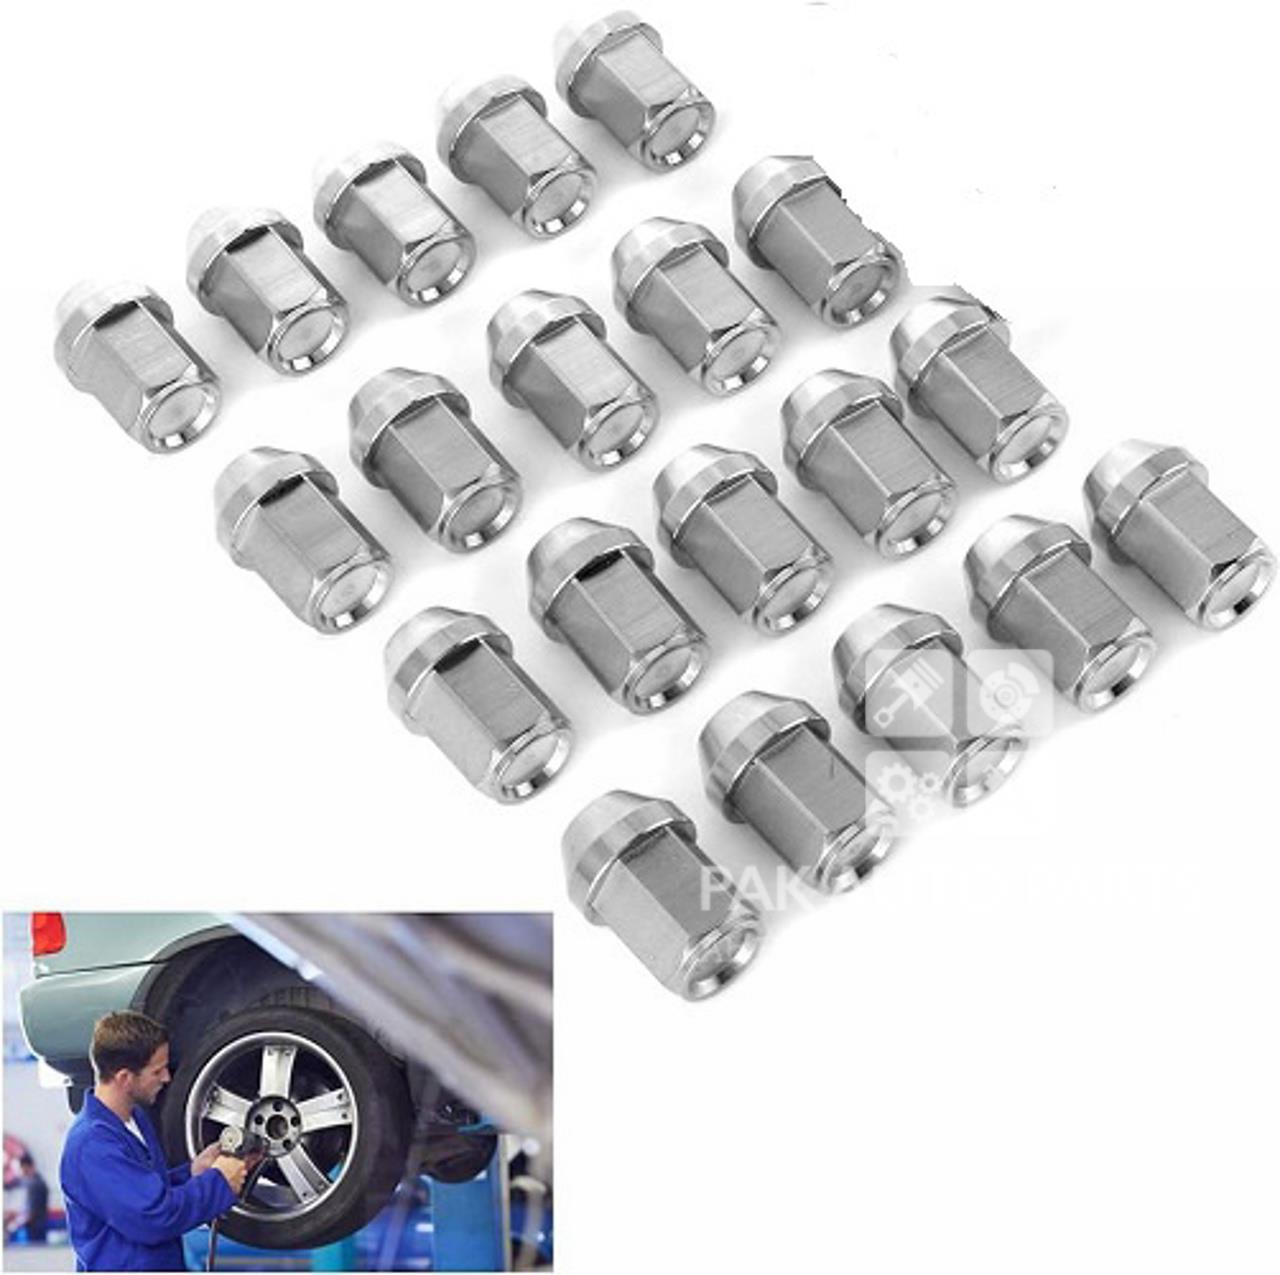 Picture of Stainless Steel Nuts 16 Pcs, Firm Installation Wheel Nut Good Corrosion Resistance (All Corolla, Civic & City Models) Spanner (PANA) Size "19"